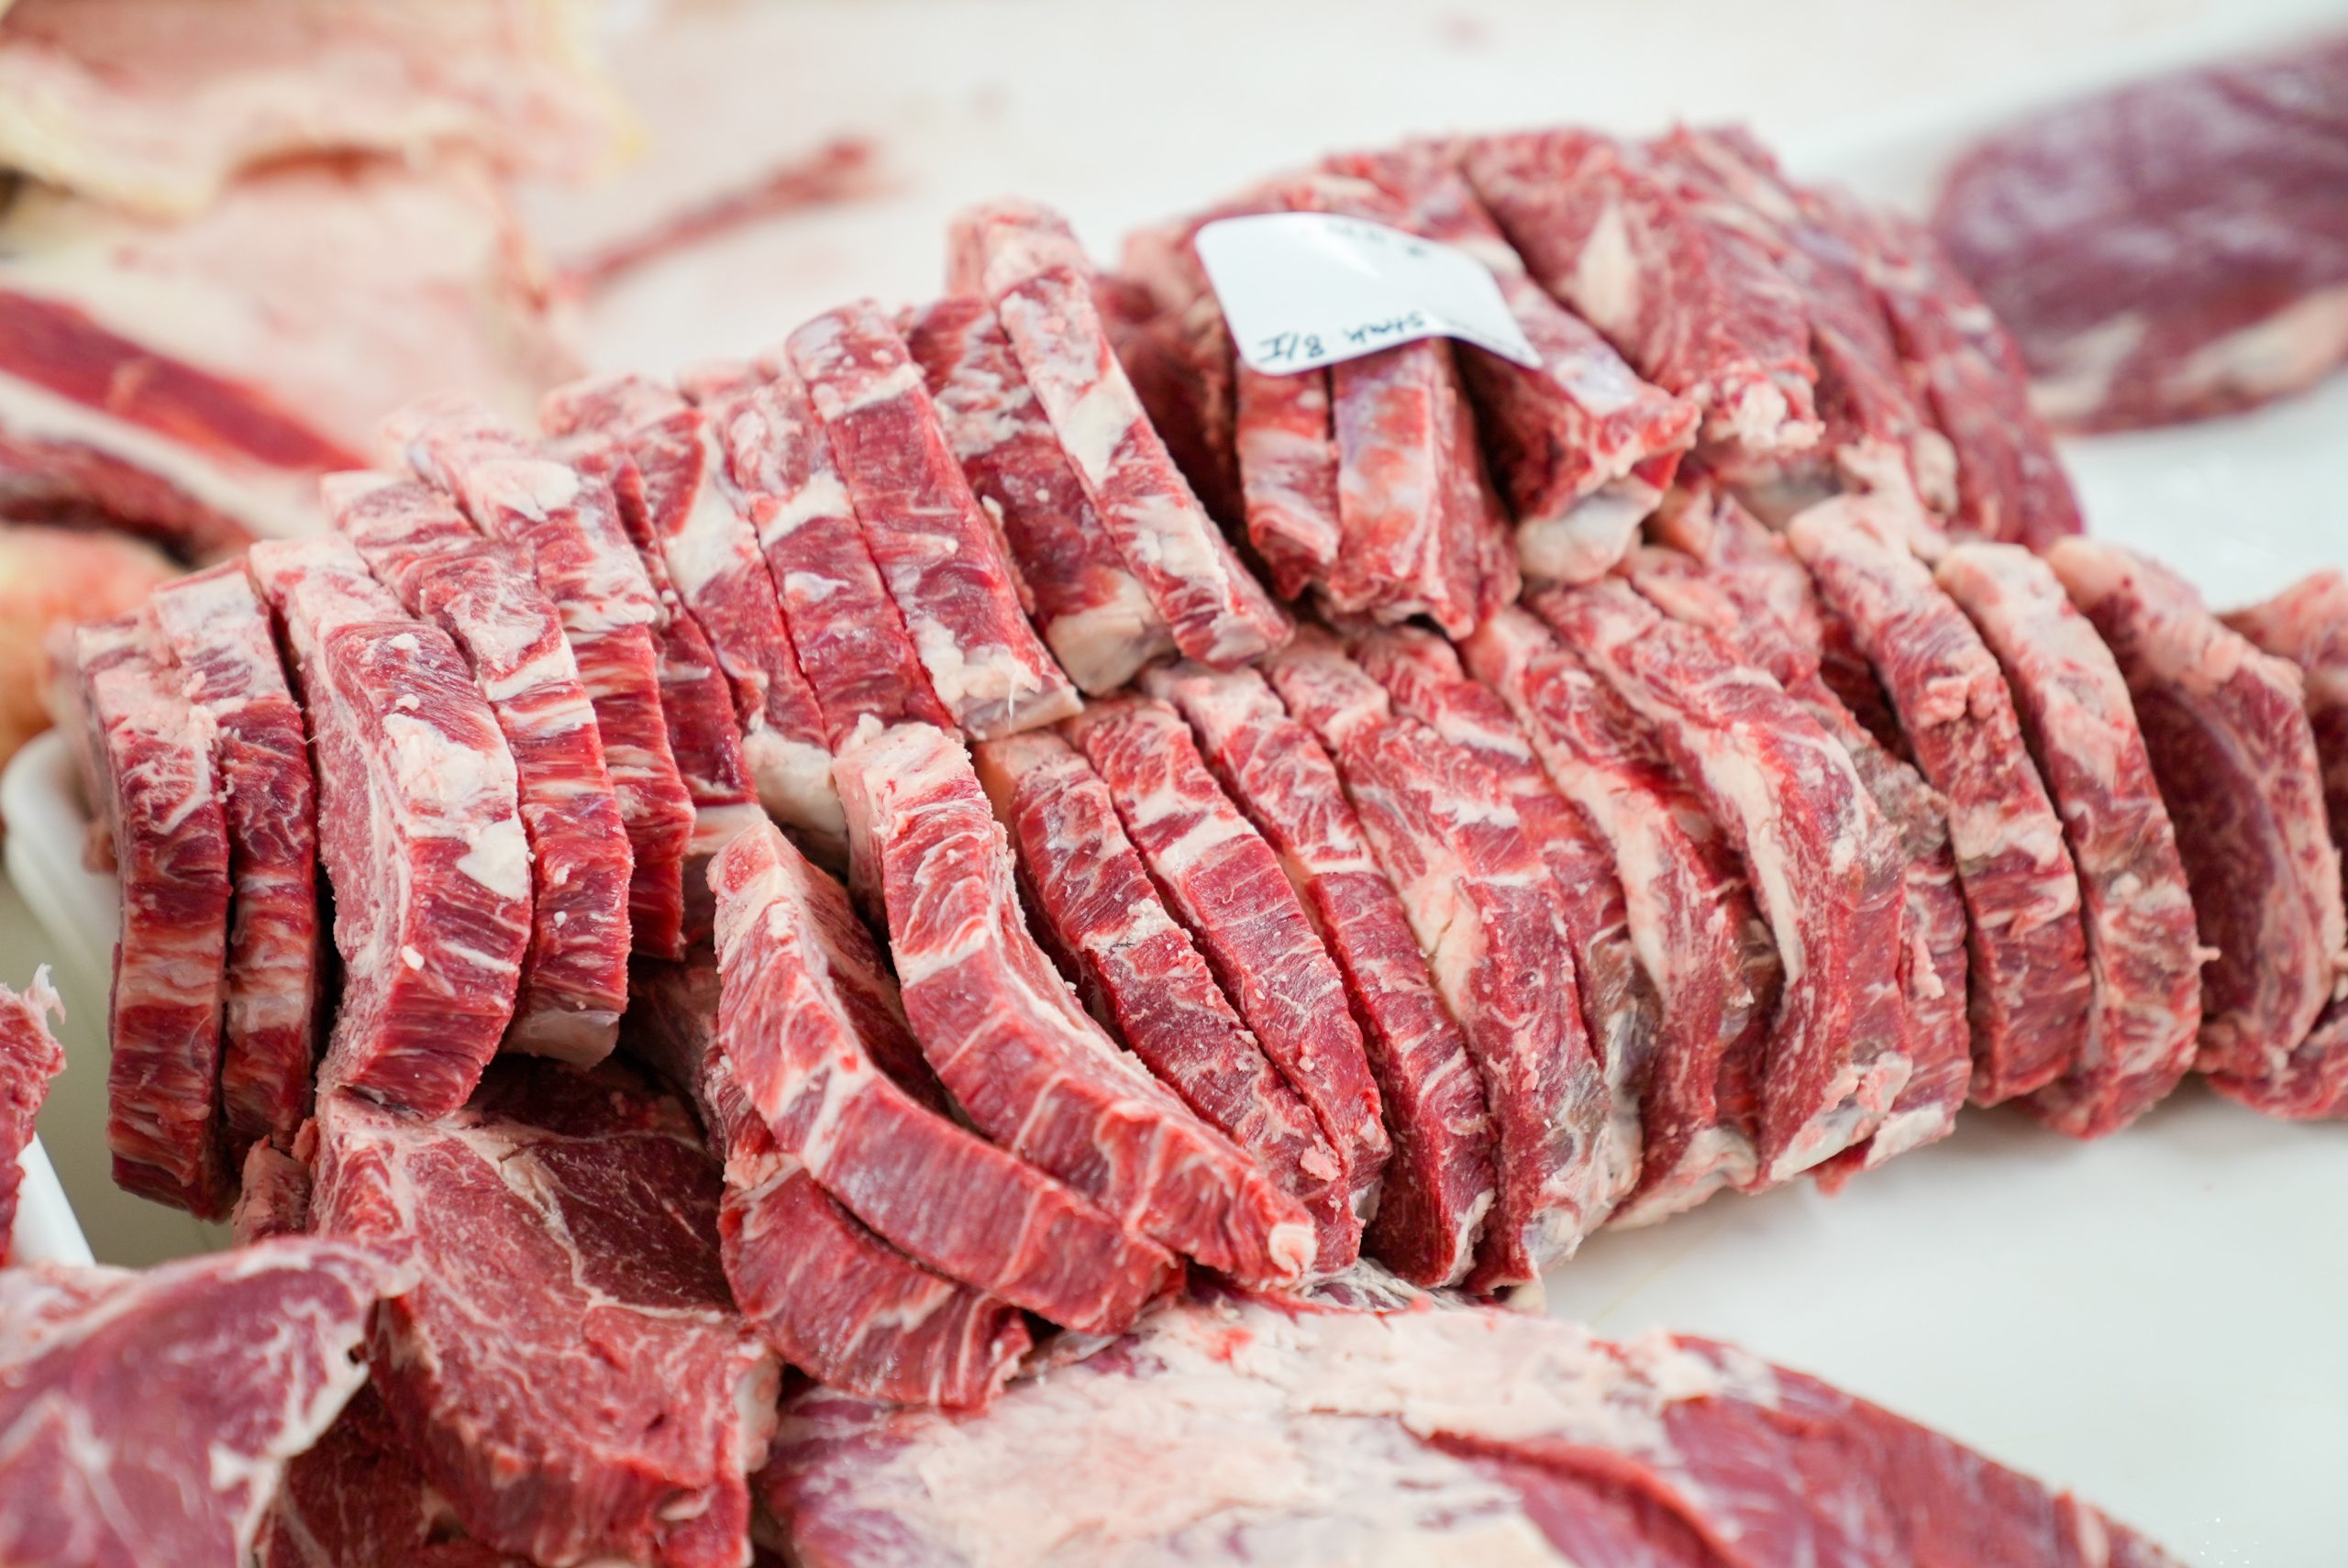 A Guide to Finding and Cooking the Best Grass-Fed Beef Cuts